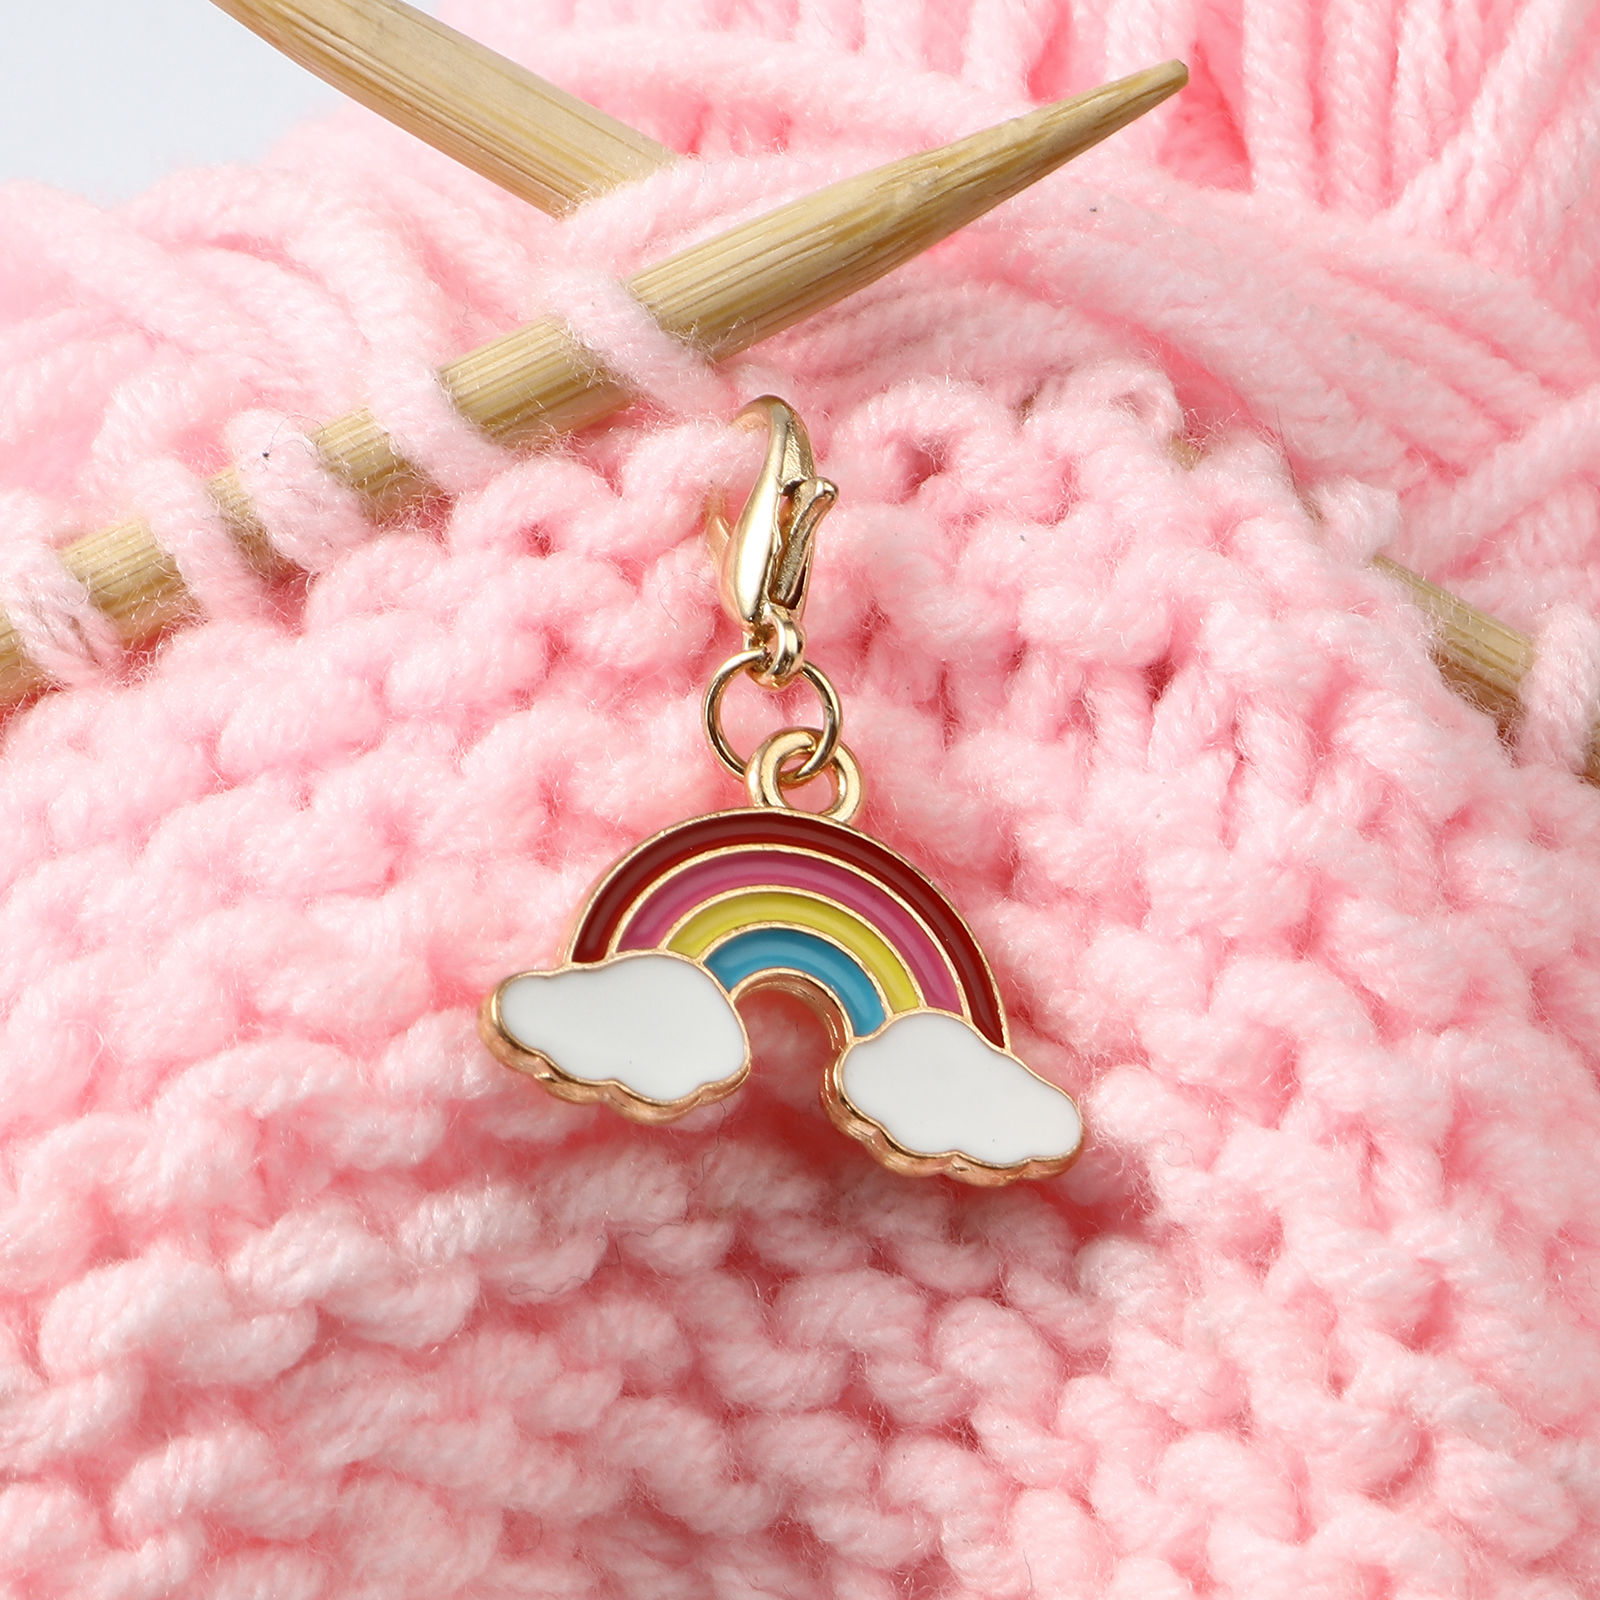 Picture of Doreenbox Zinc Based Alloy Weather Collection Knitting Stitch Markers Gold Plated Multicolor Rainbow Enamel 3cm x 2.3cm, 1 Set ( 5 PCs/Set)